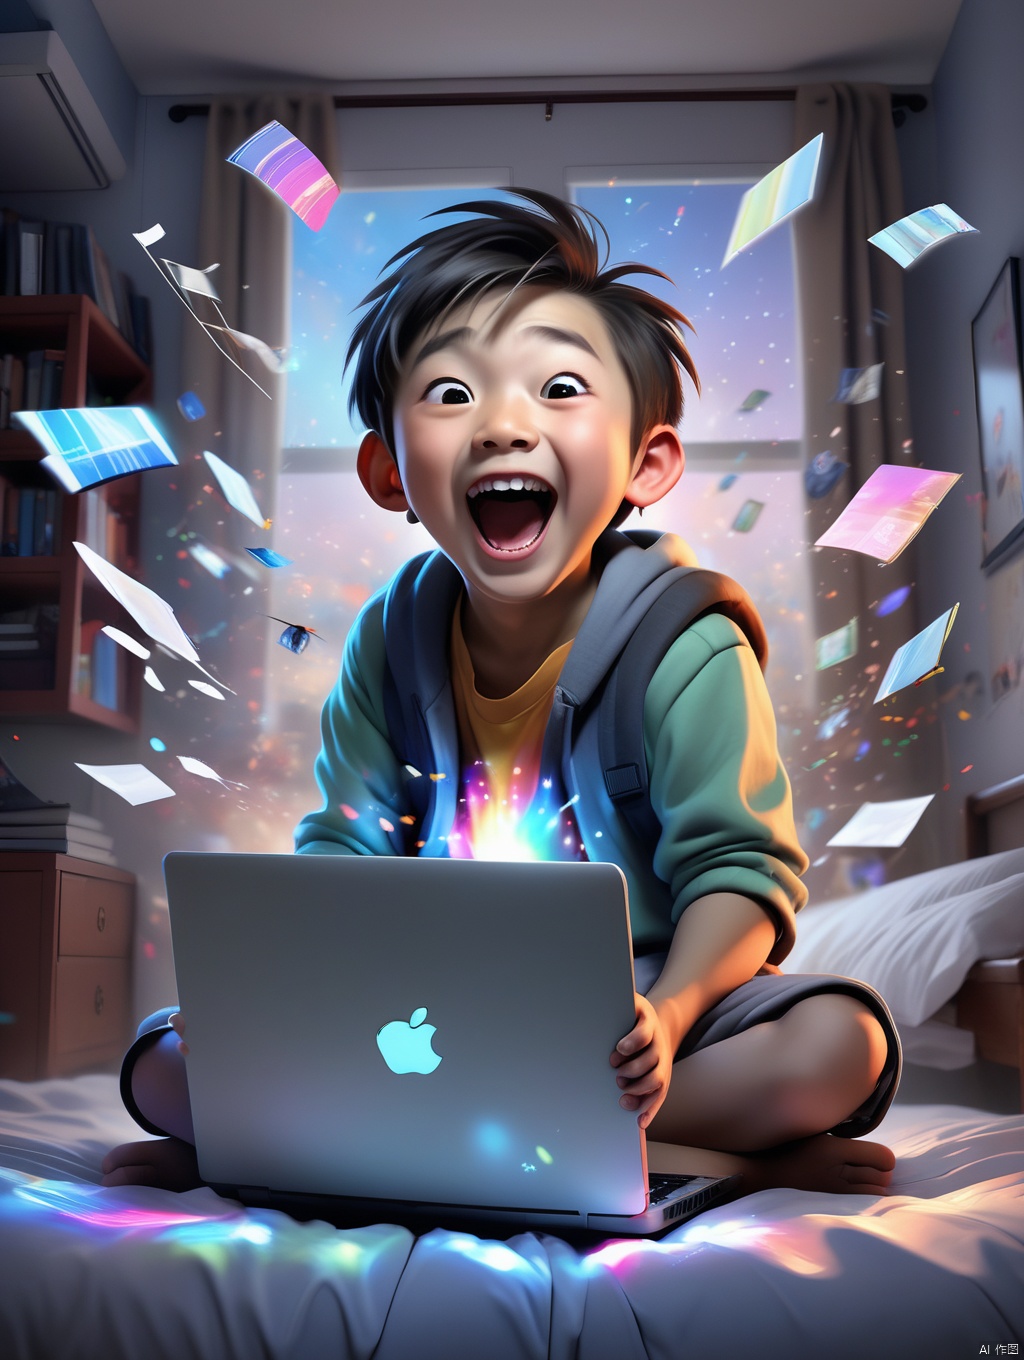  A chinese boy sitting in front of a laptop, surprised, surprised, laughing, and out of the arms, excited, a lot of pictures flying out of the laptop , and with colorful light, mystery, amazing detail, high-definition, professional lighting, in the bedroom,